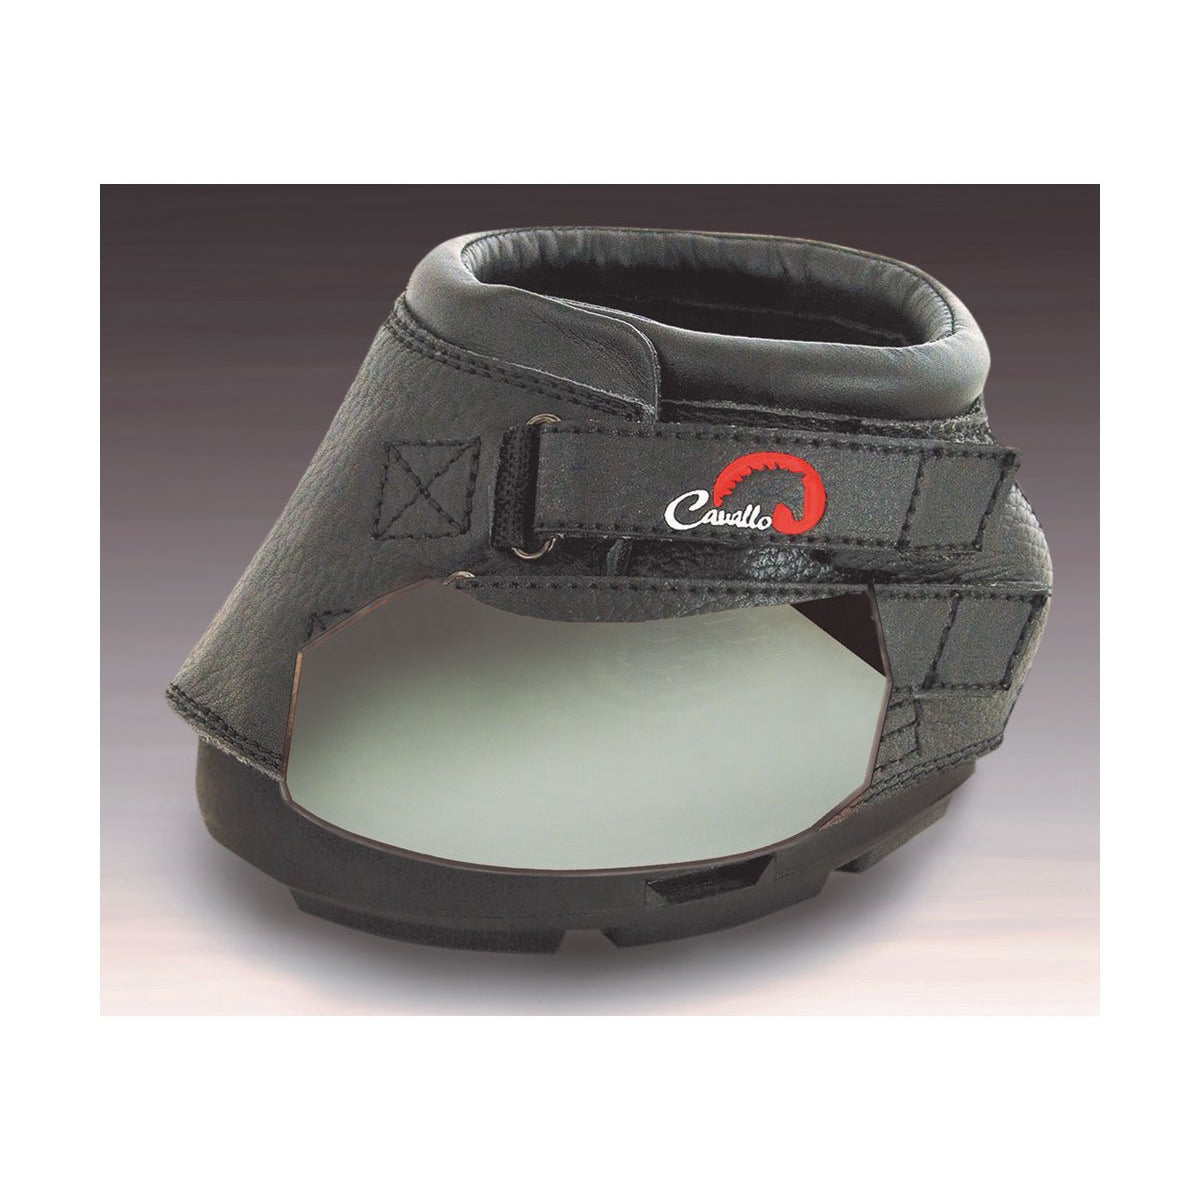 Cavallo Support Pads